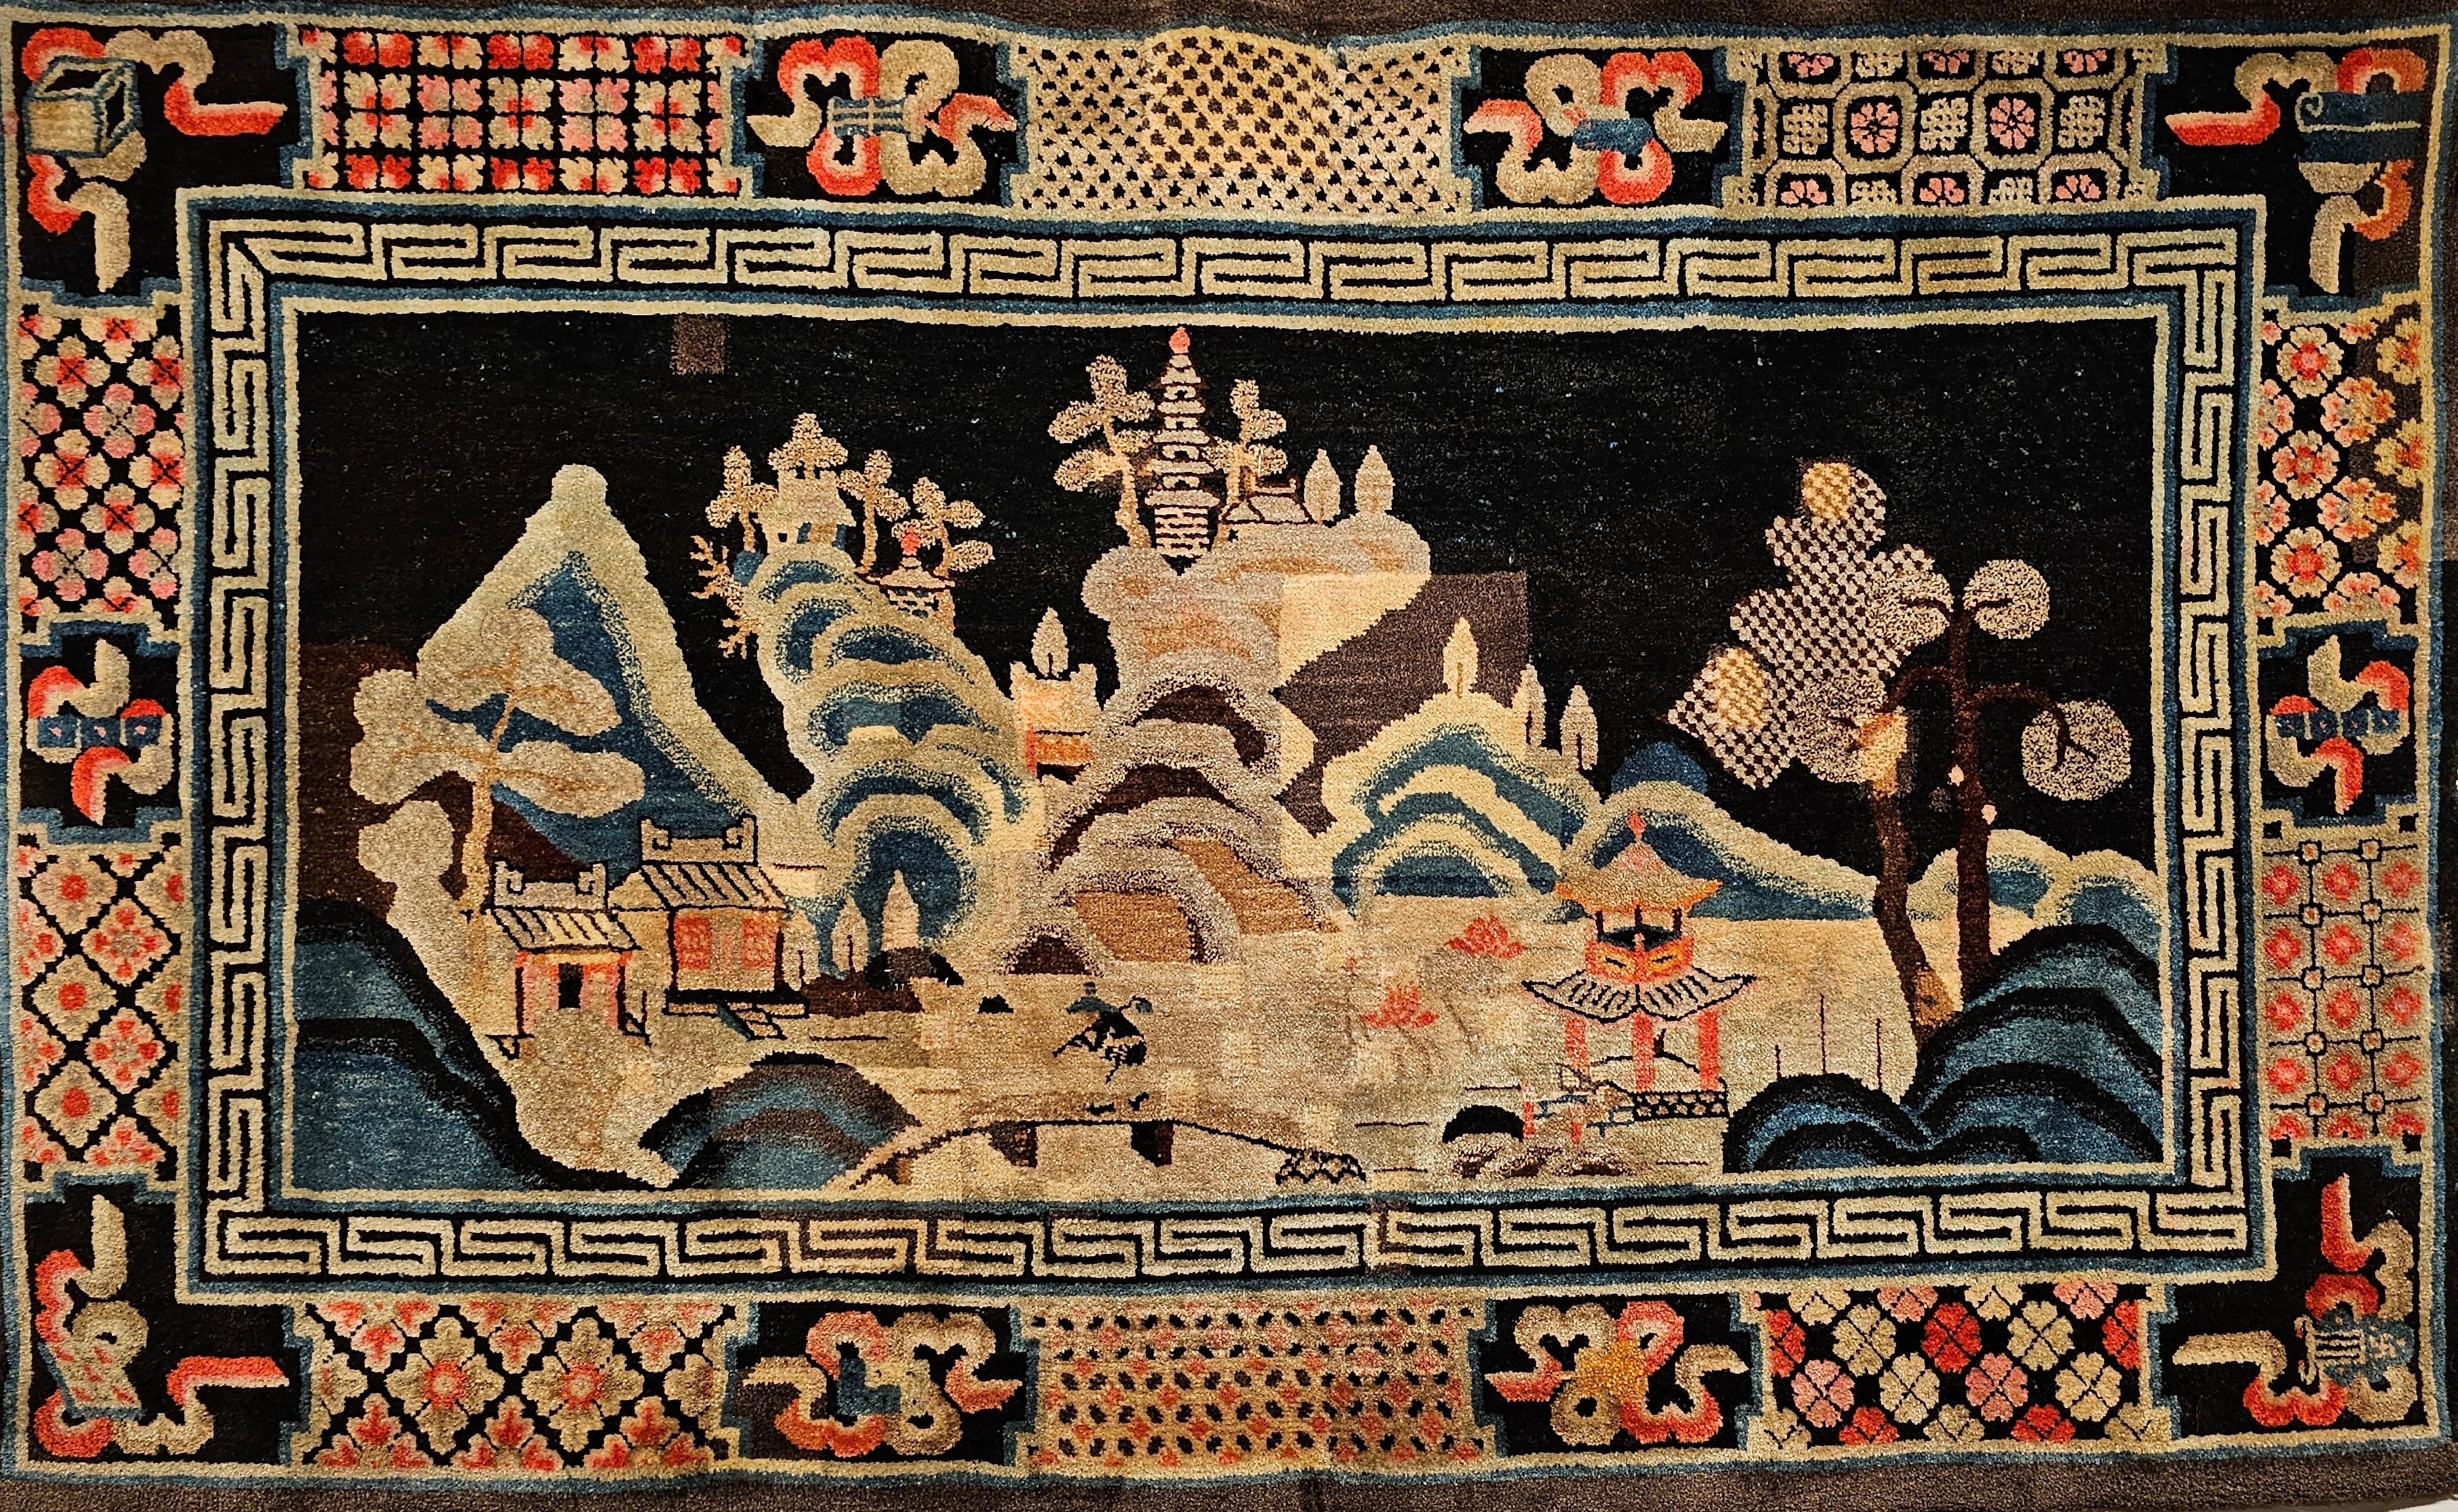 A beautiful late 19th century Ningxia  rug from the western China.  The rug has a design similar to the Khotan and Ningxia rugs.  The design is of countryside with mountains in the distance with pagodas on top and rivers in the valley.  There is a